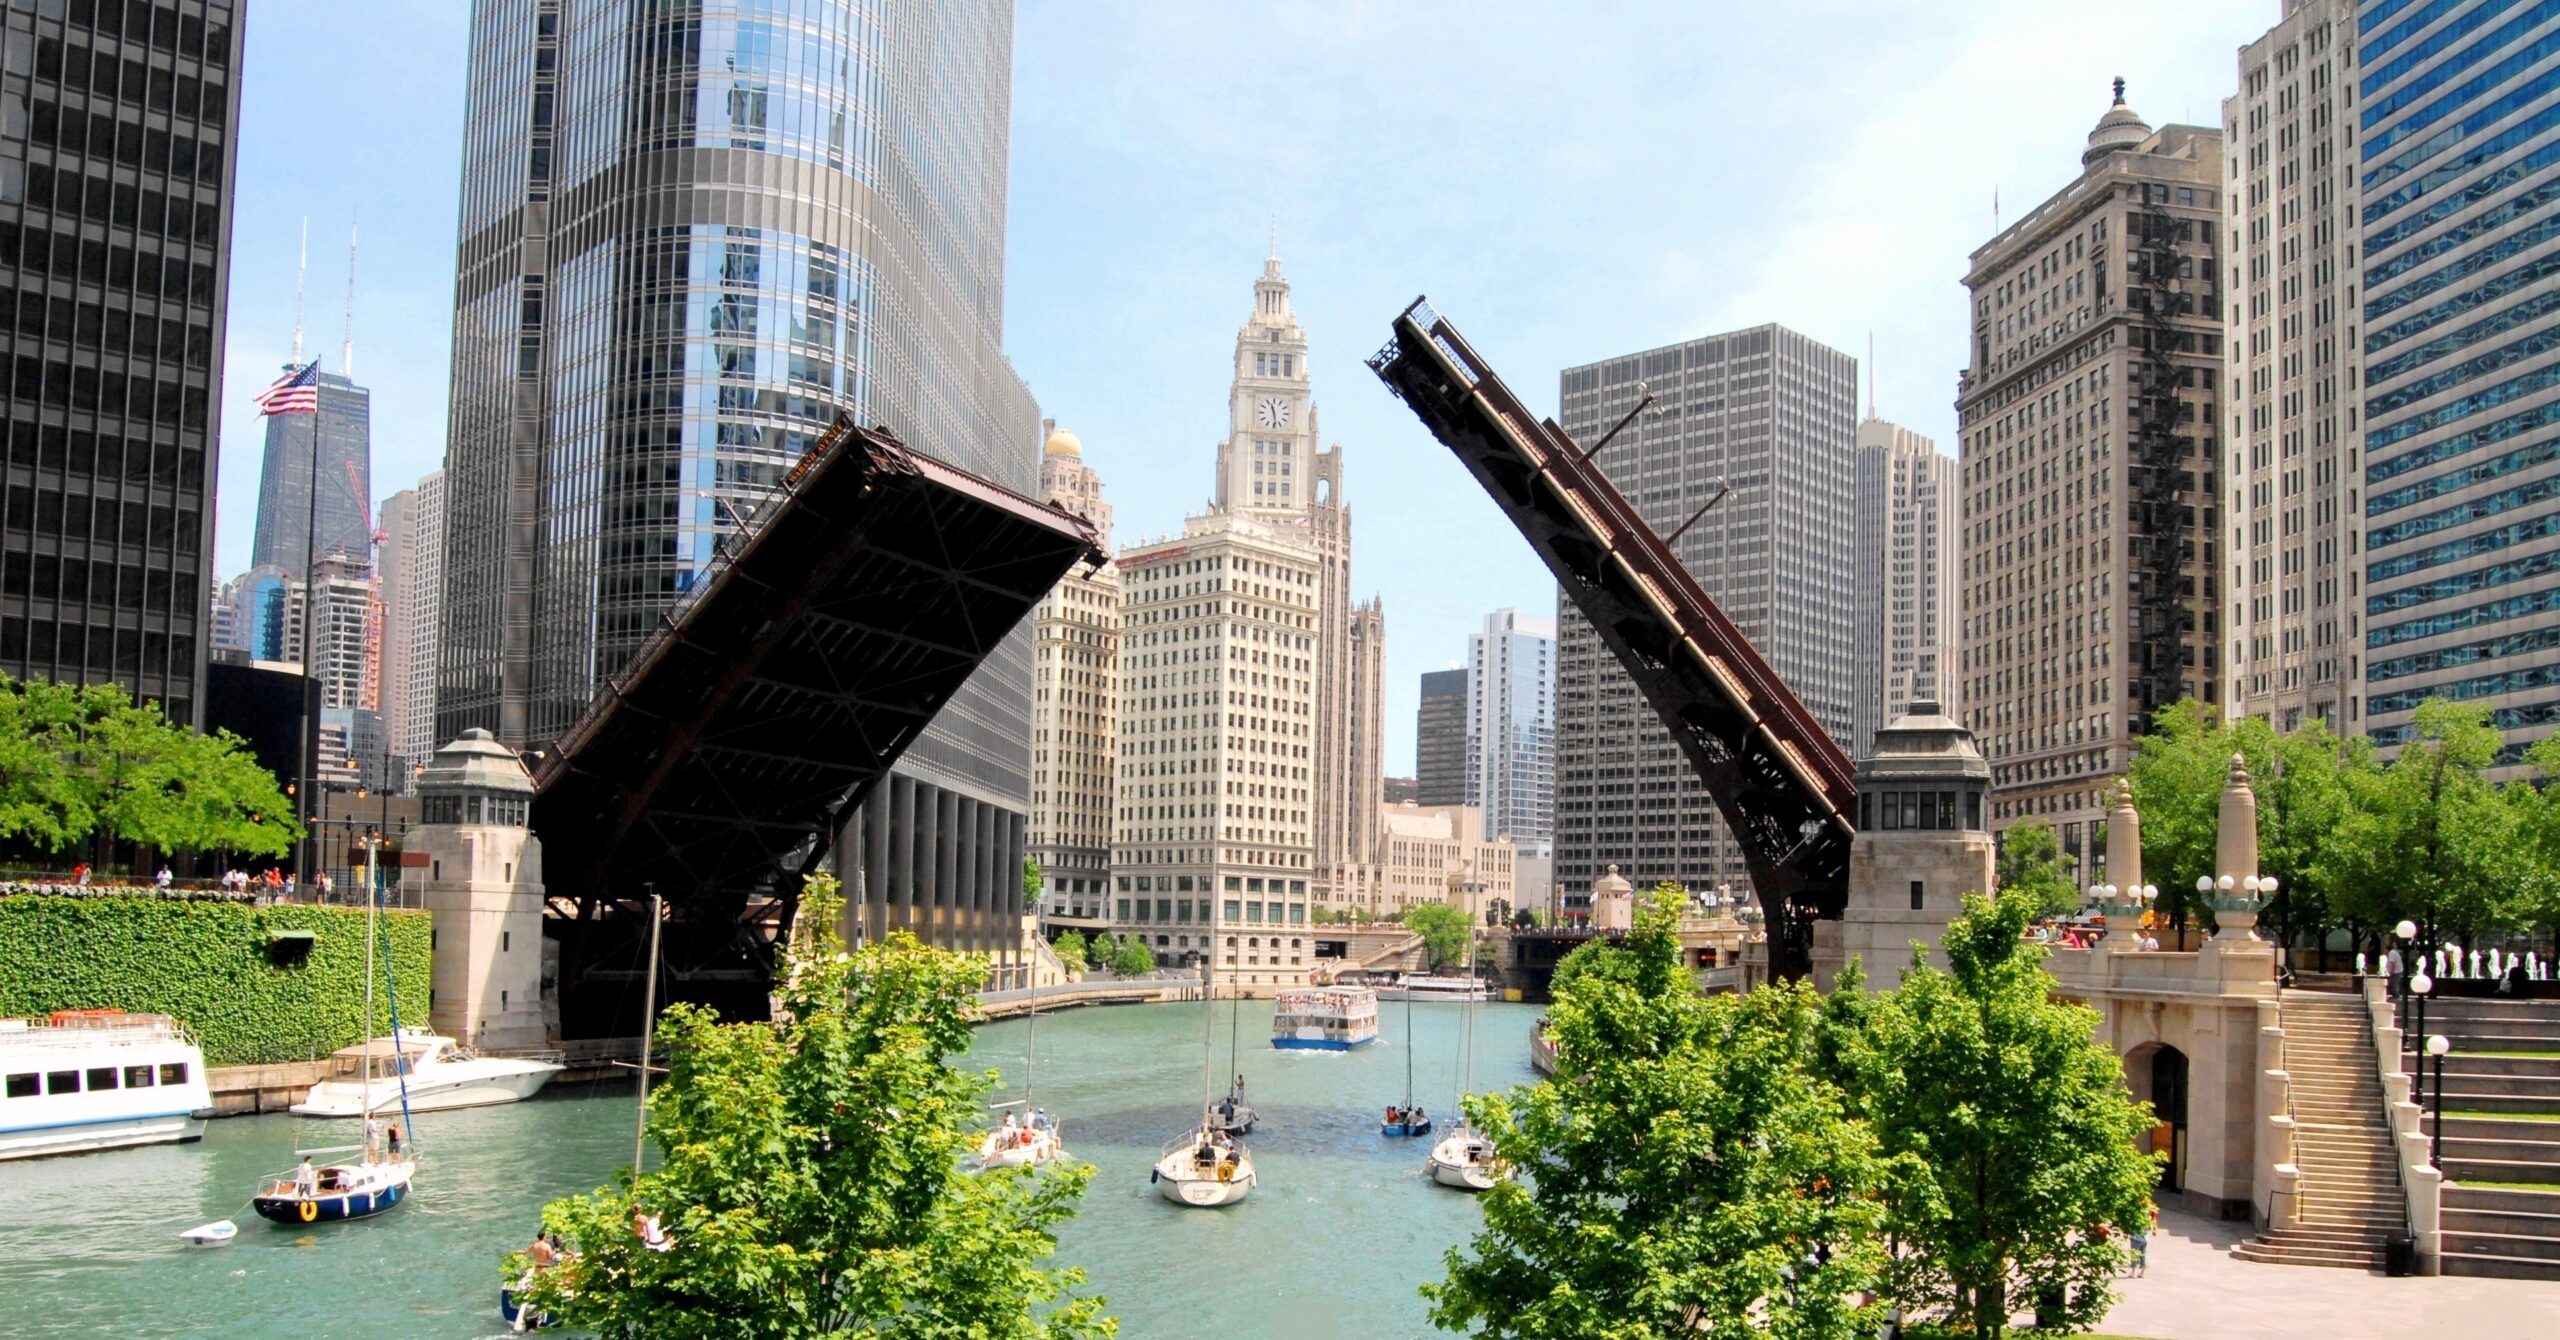 Architectural River Cruise and Guided Walking tour of Chicago